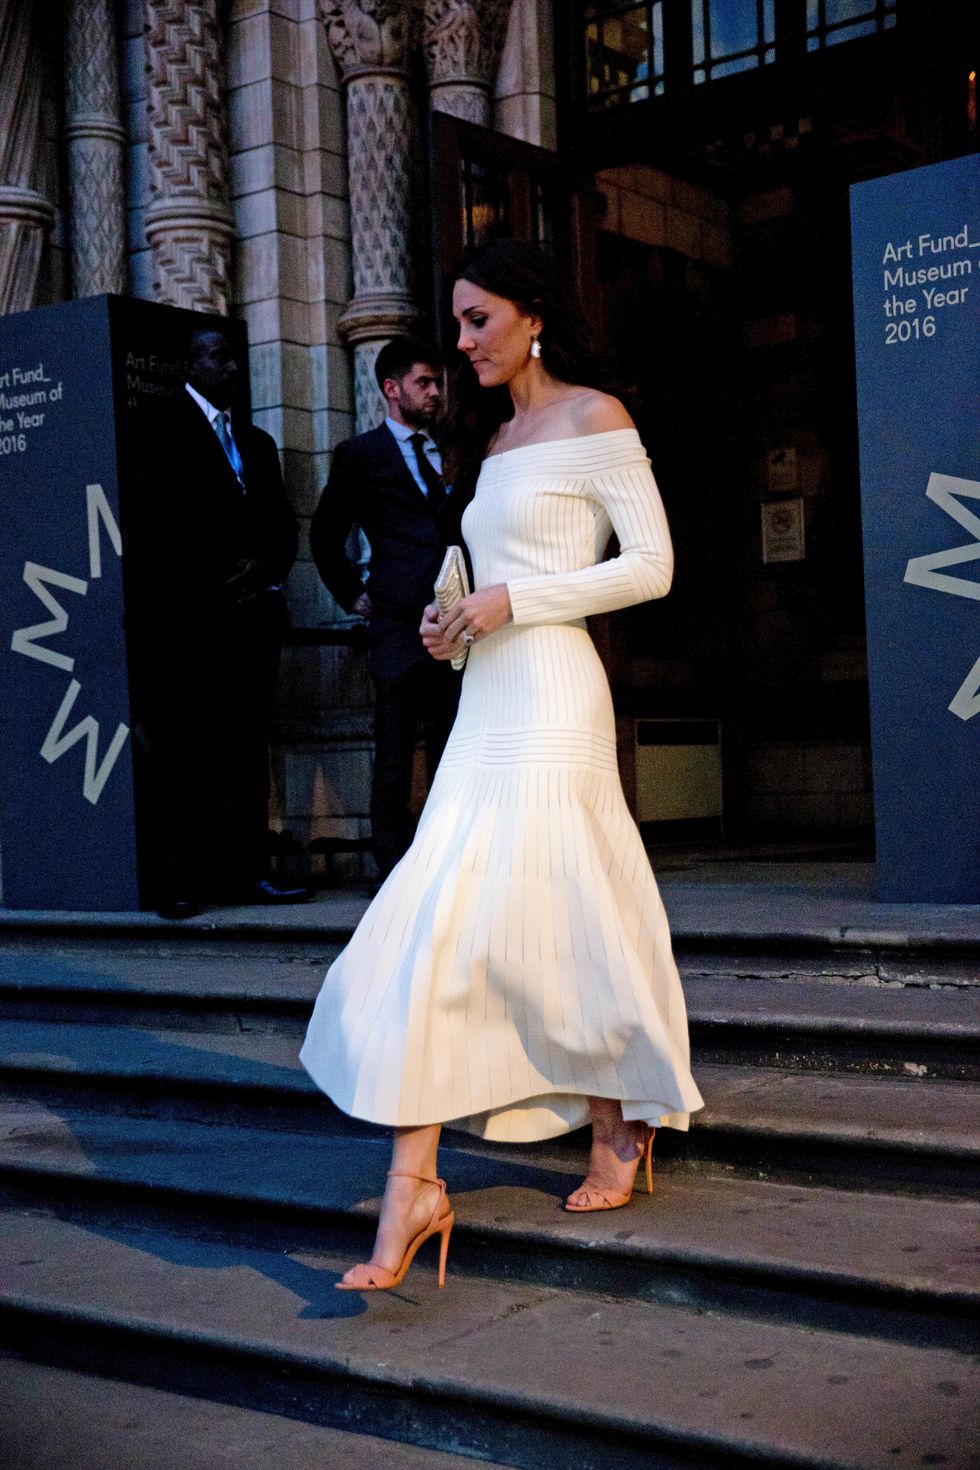 Kate Middleton wearing an off-the-shoulder white dress